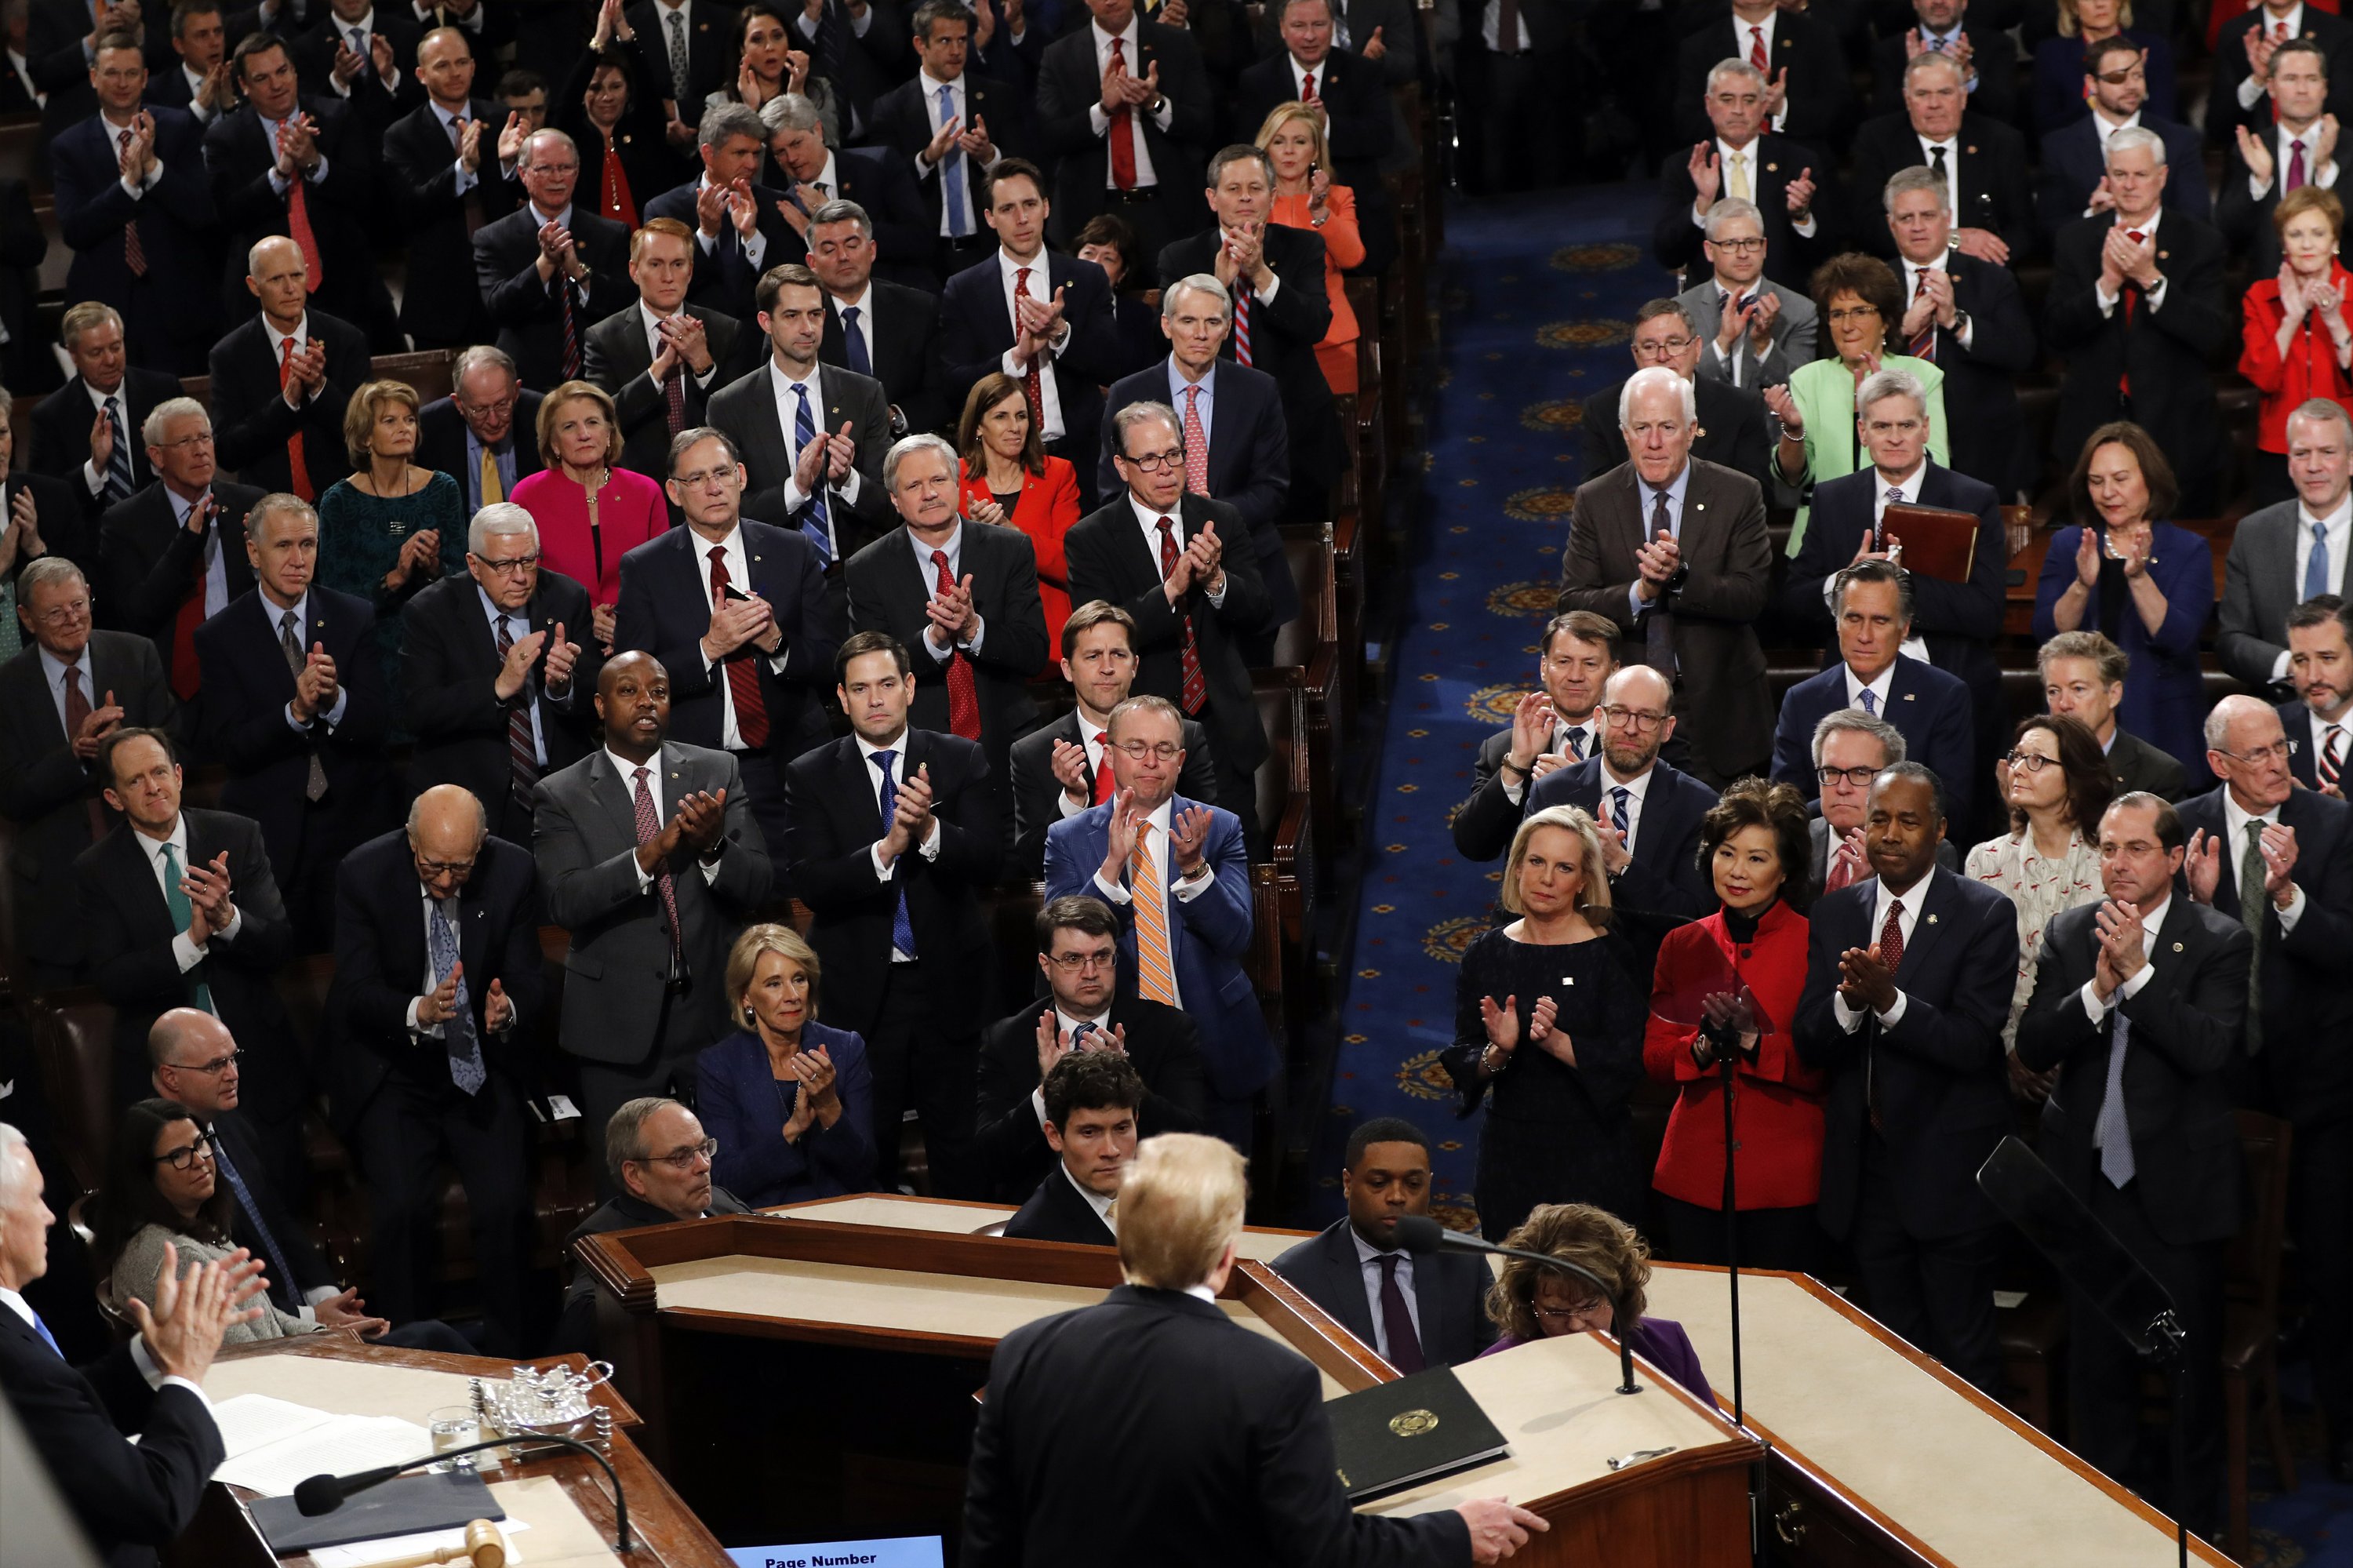 5 Takeaways from Trump's State of the Union speech AP News